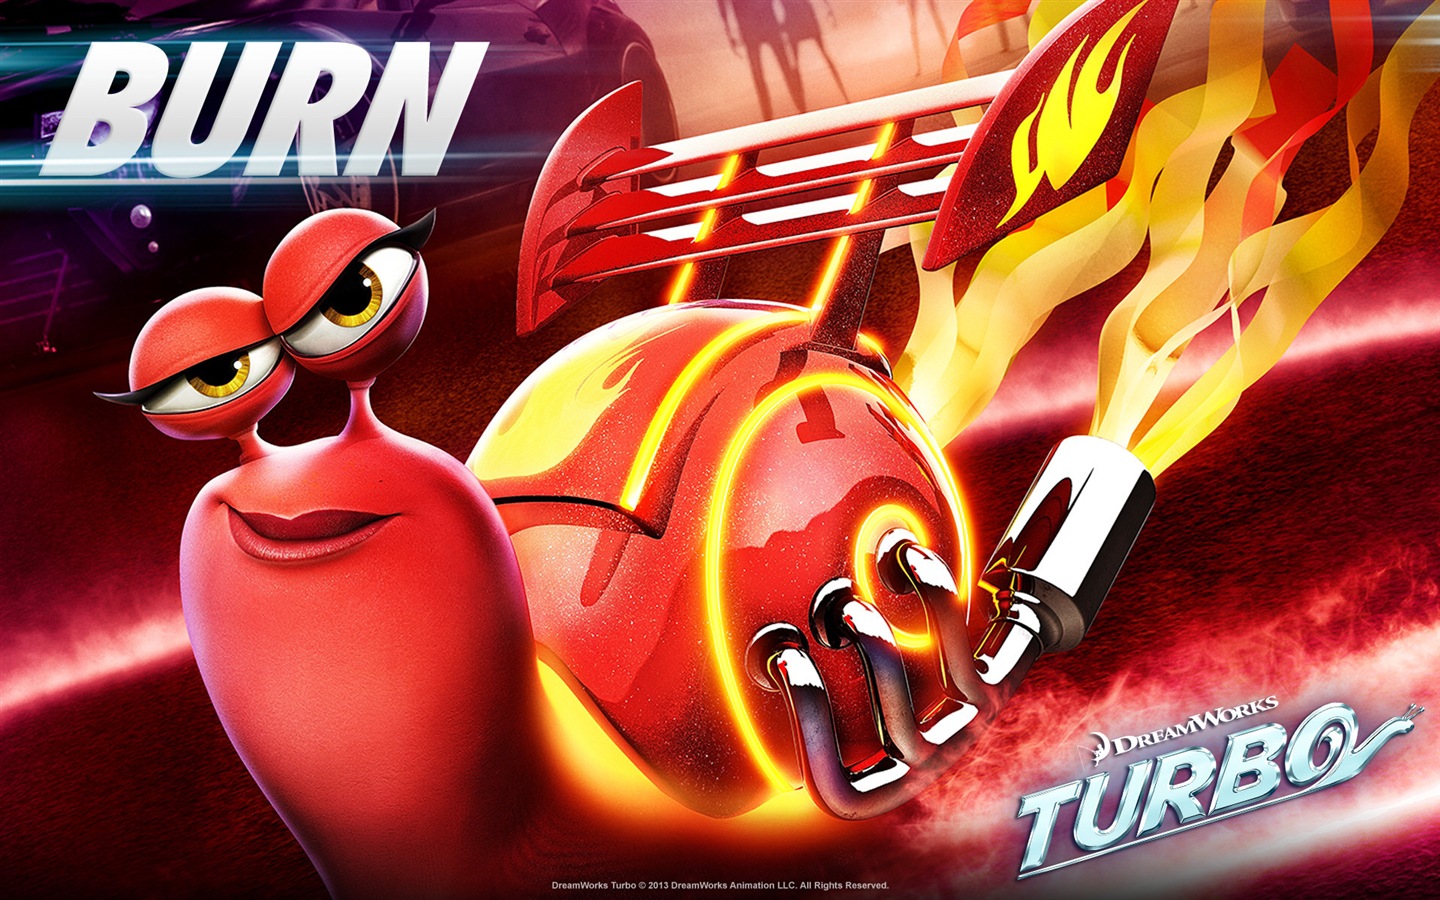 Turbo 3D movie HD wallpapers #7 - 1440x900